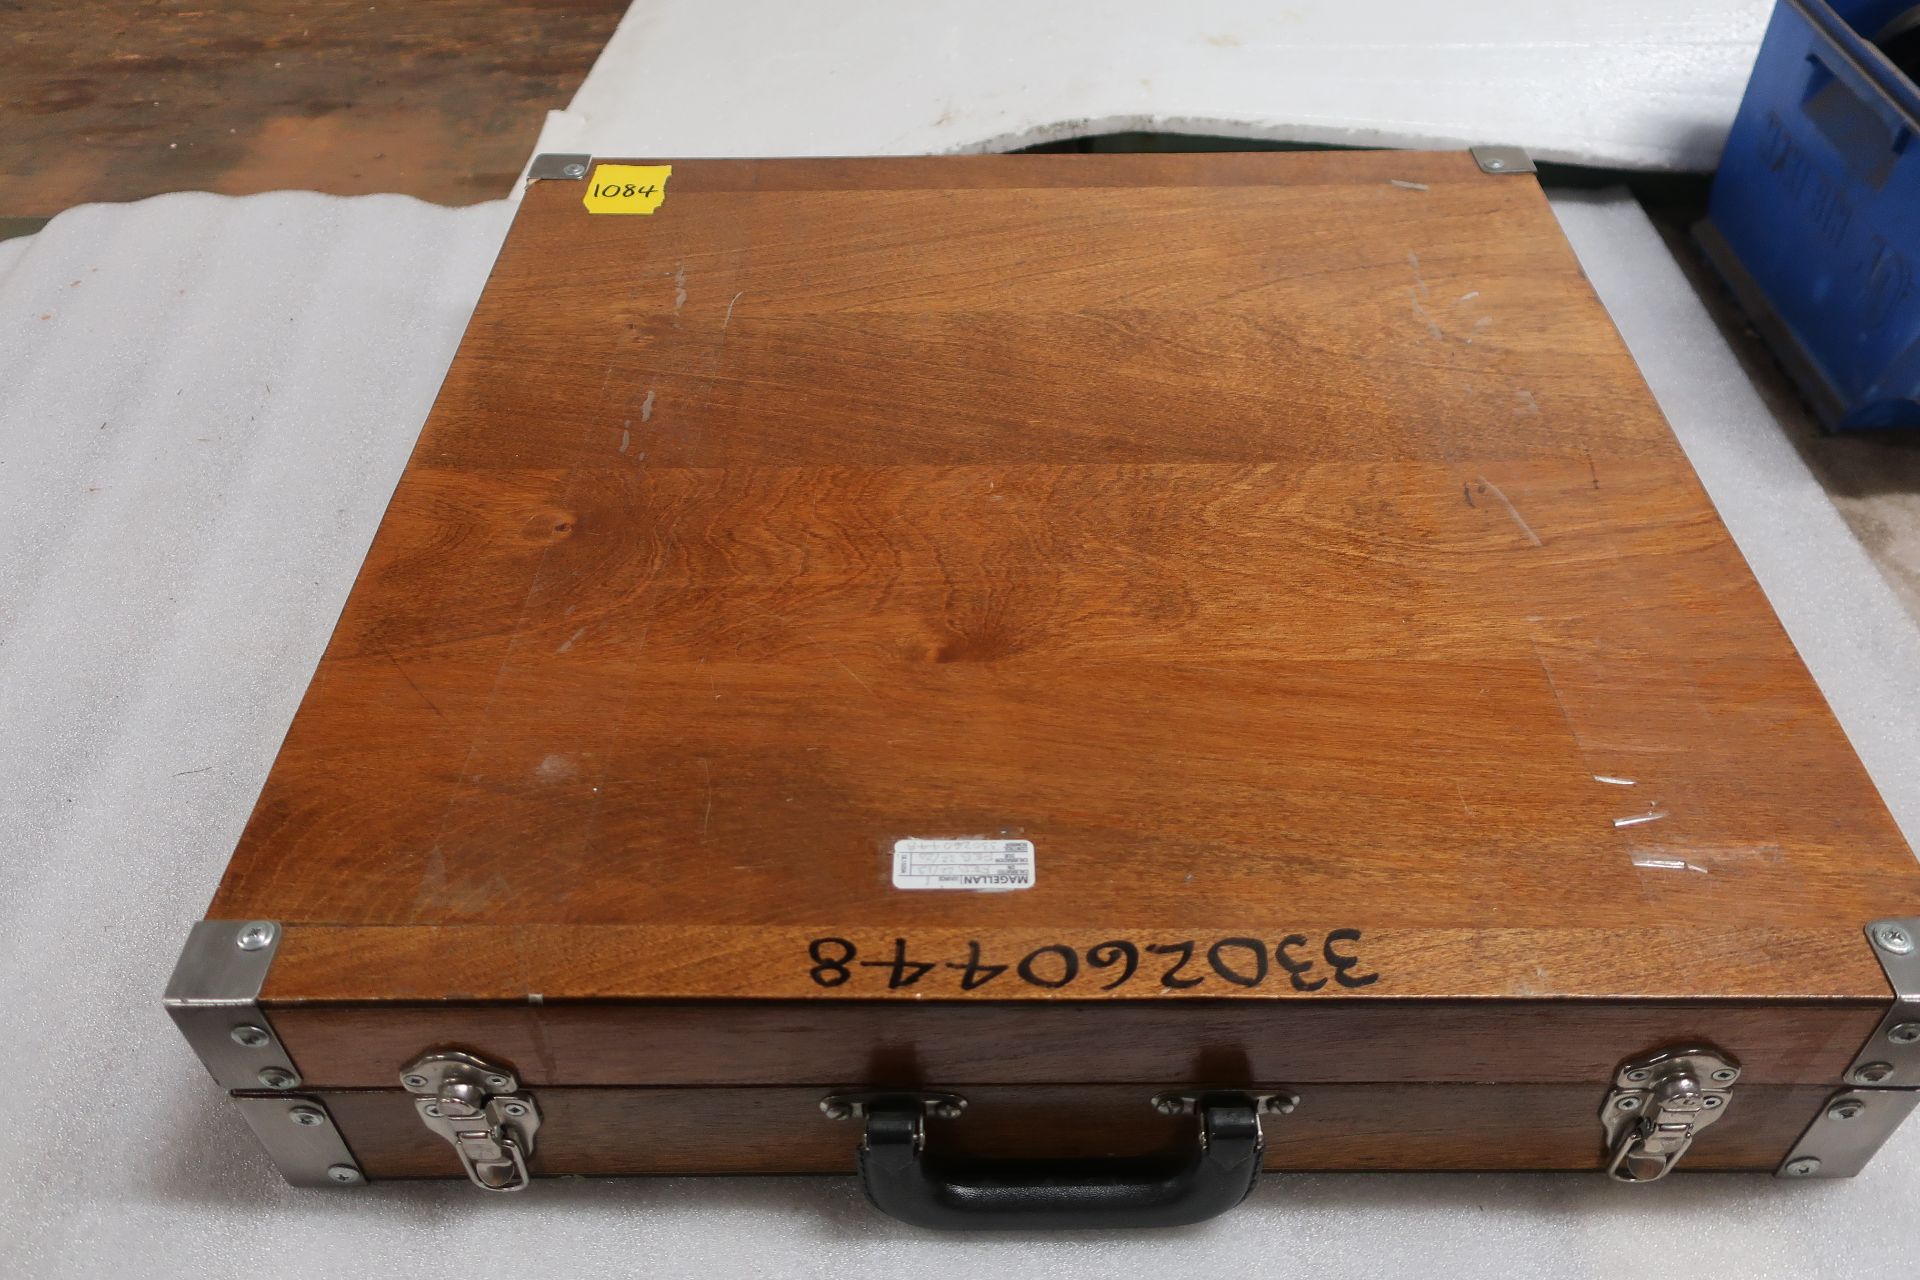 Angle Measurement Unit with Index Master Turntable Model 7354 in case - Image 2 of 2